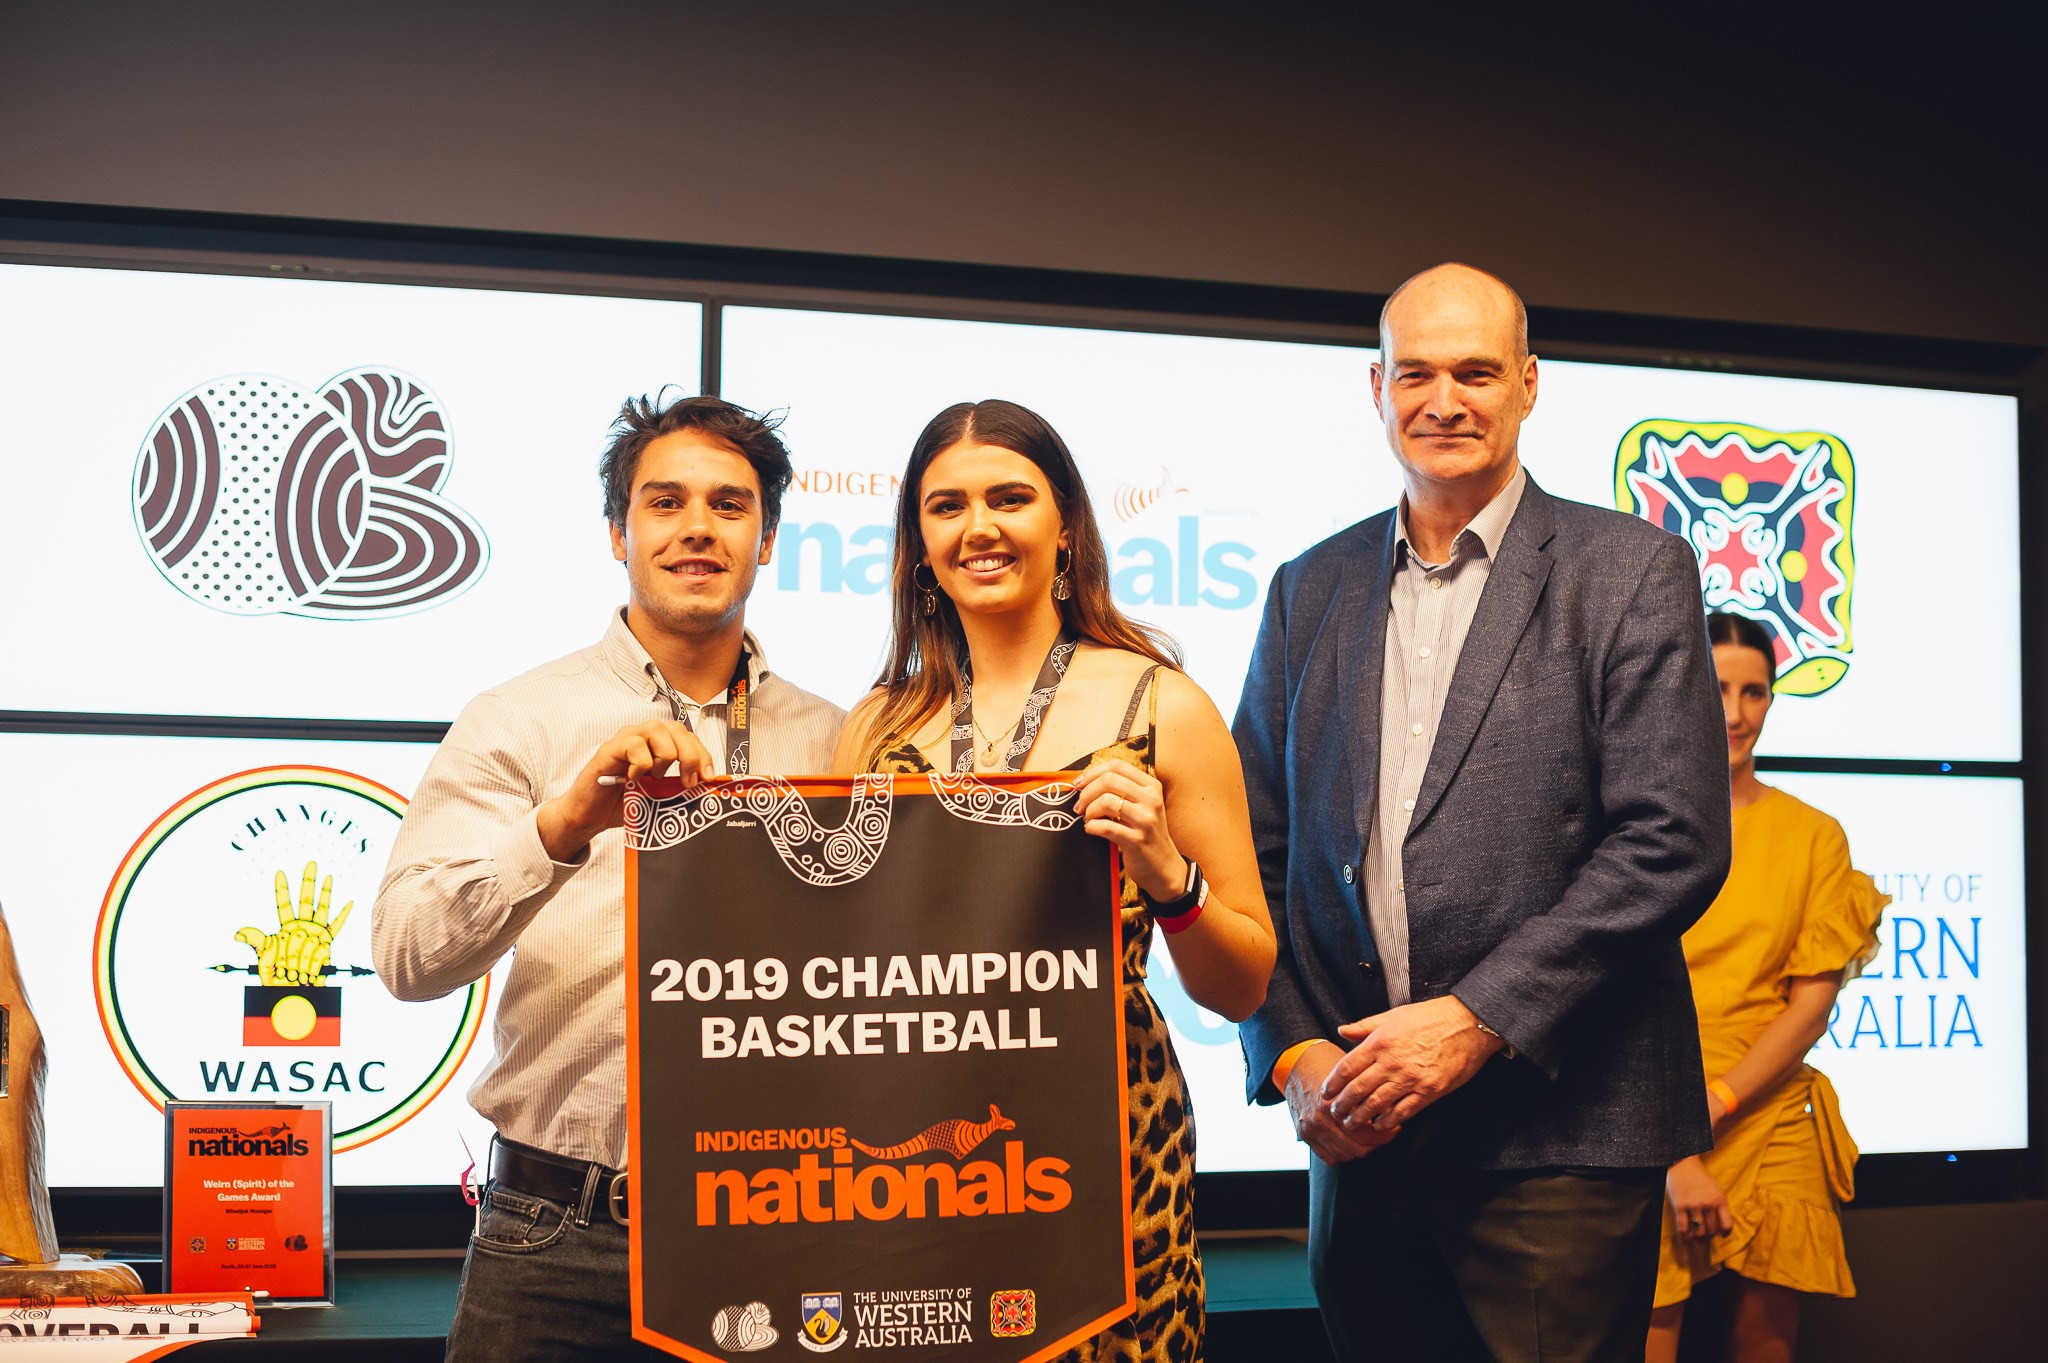 Competitions in mixed basketball, netball, touch football and volleyball take place at the Indigenous Nationals ©Indigenous Nationals